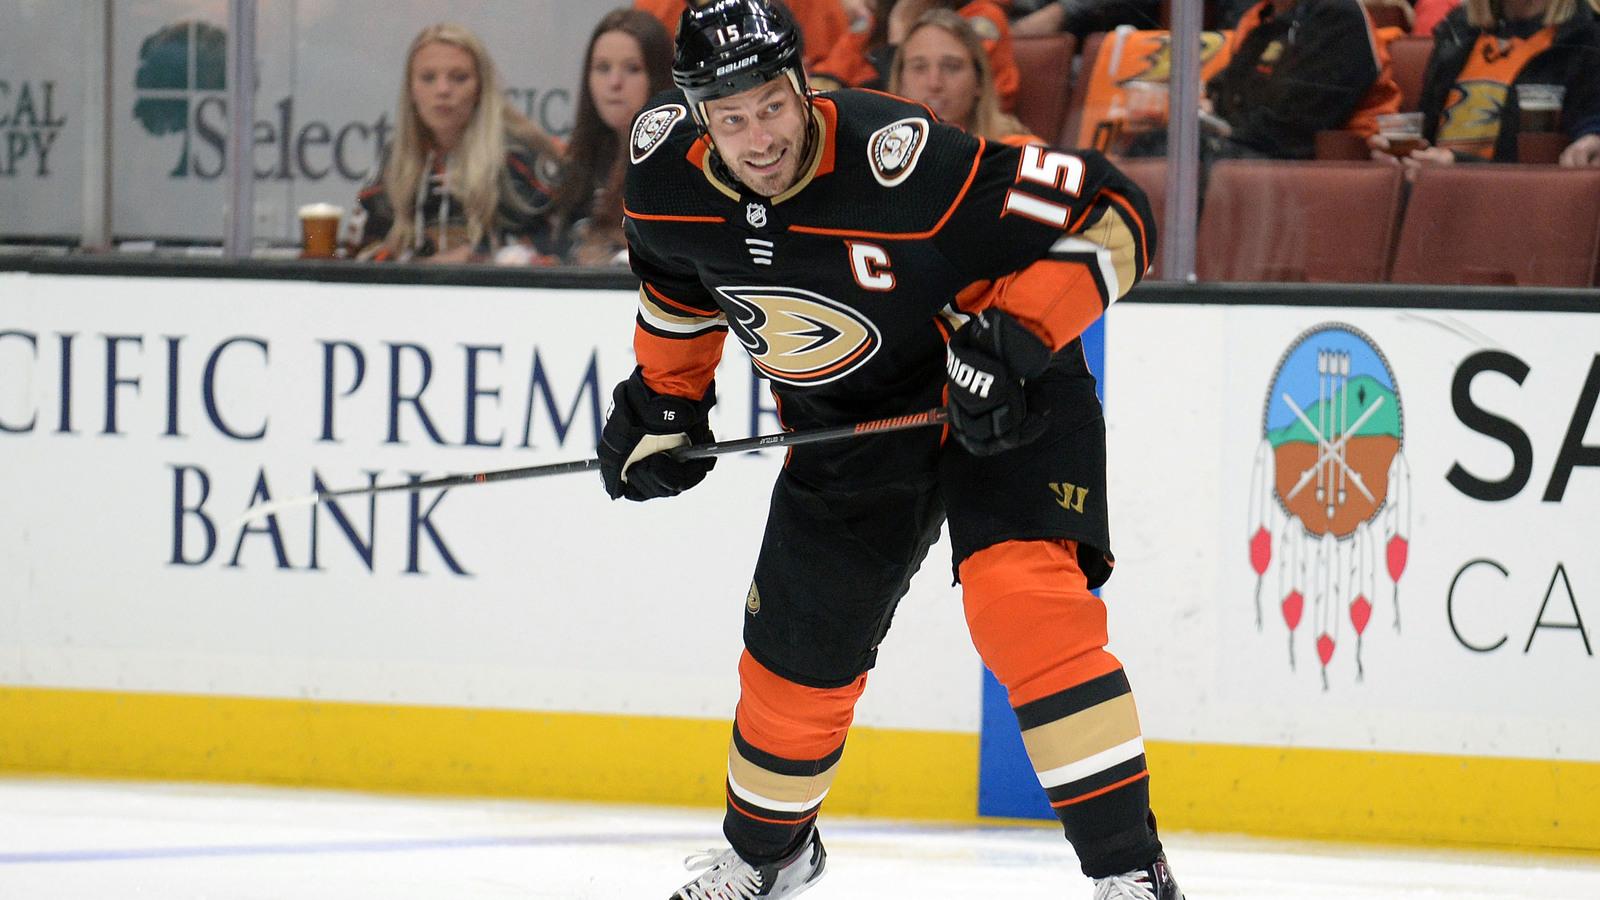 Watch: Ducks' Ryan Getzlaf takes puck to face, returns to game